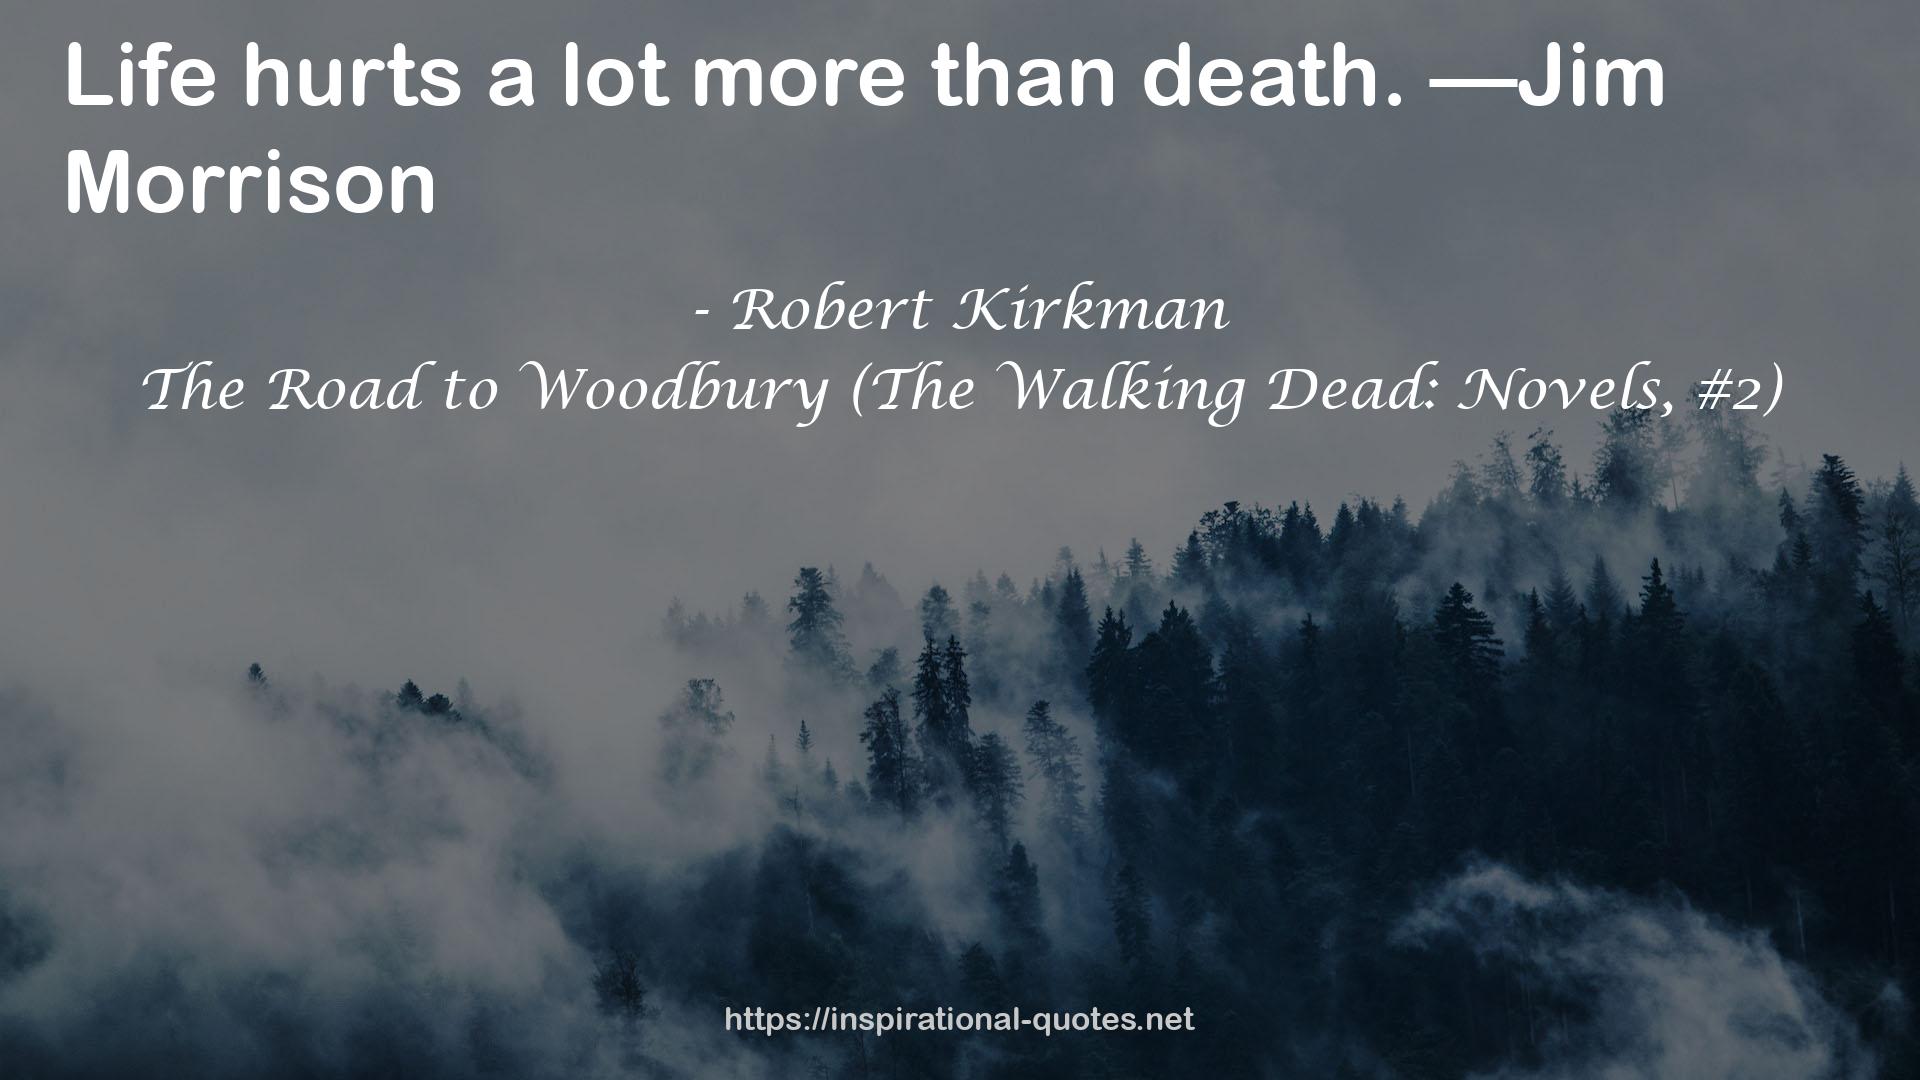 The Road to Woodbury (The Walking Dead: Novels, #2) QUOTES